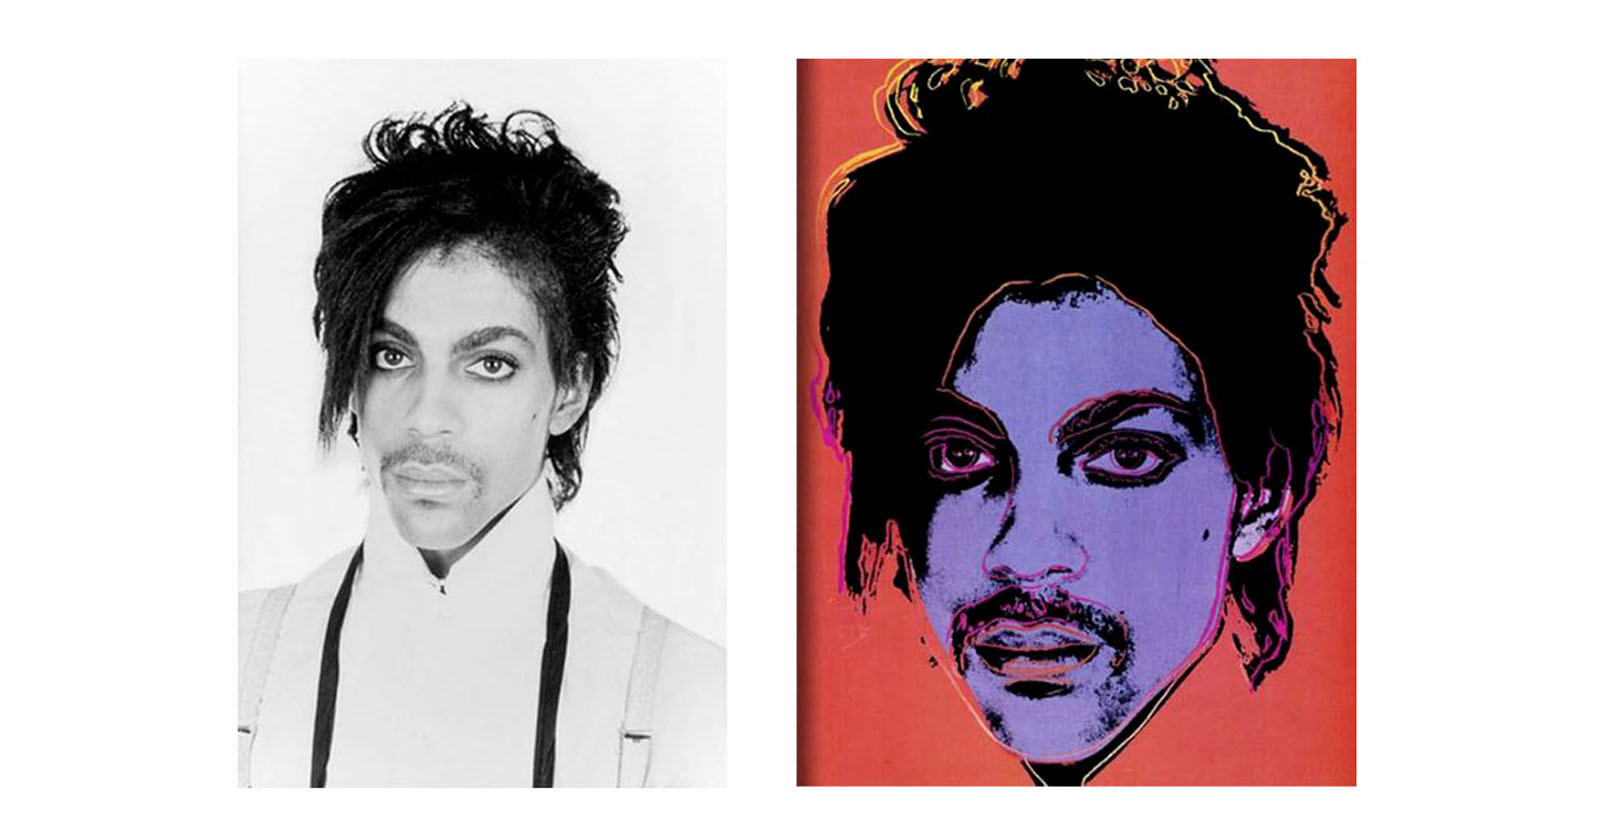  supreme court rules andy warhol prince art copyright 